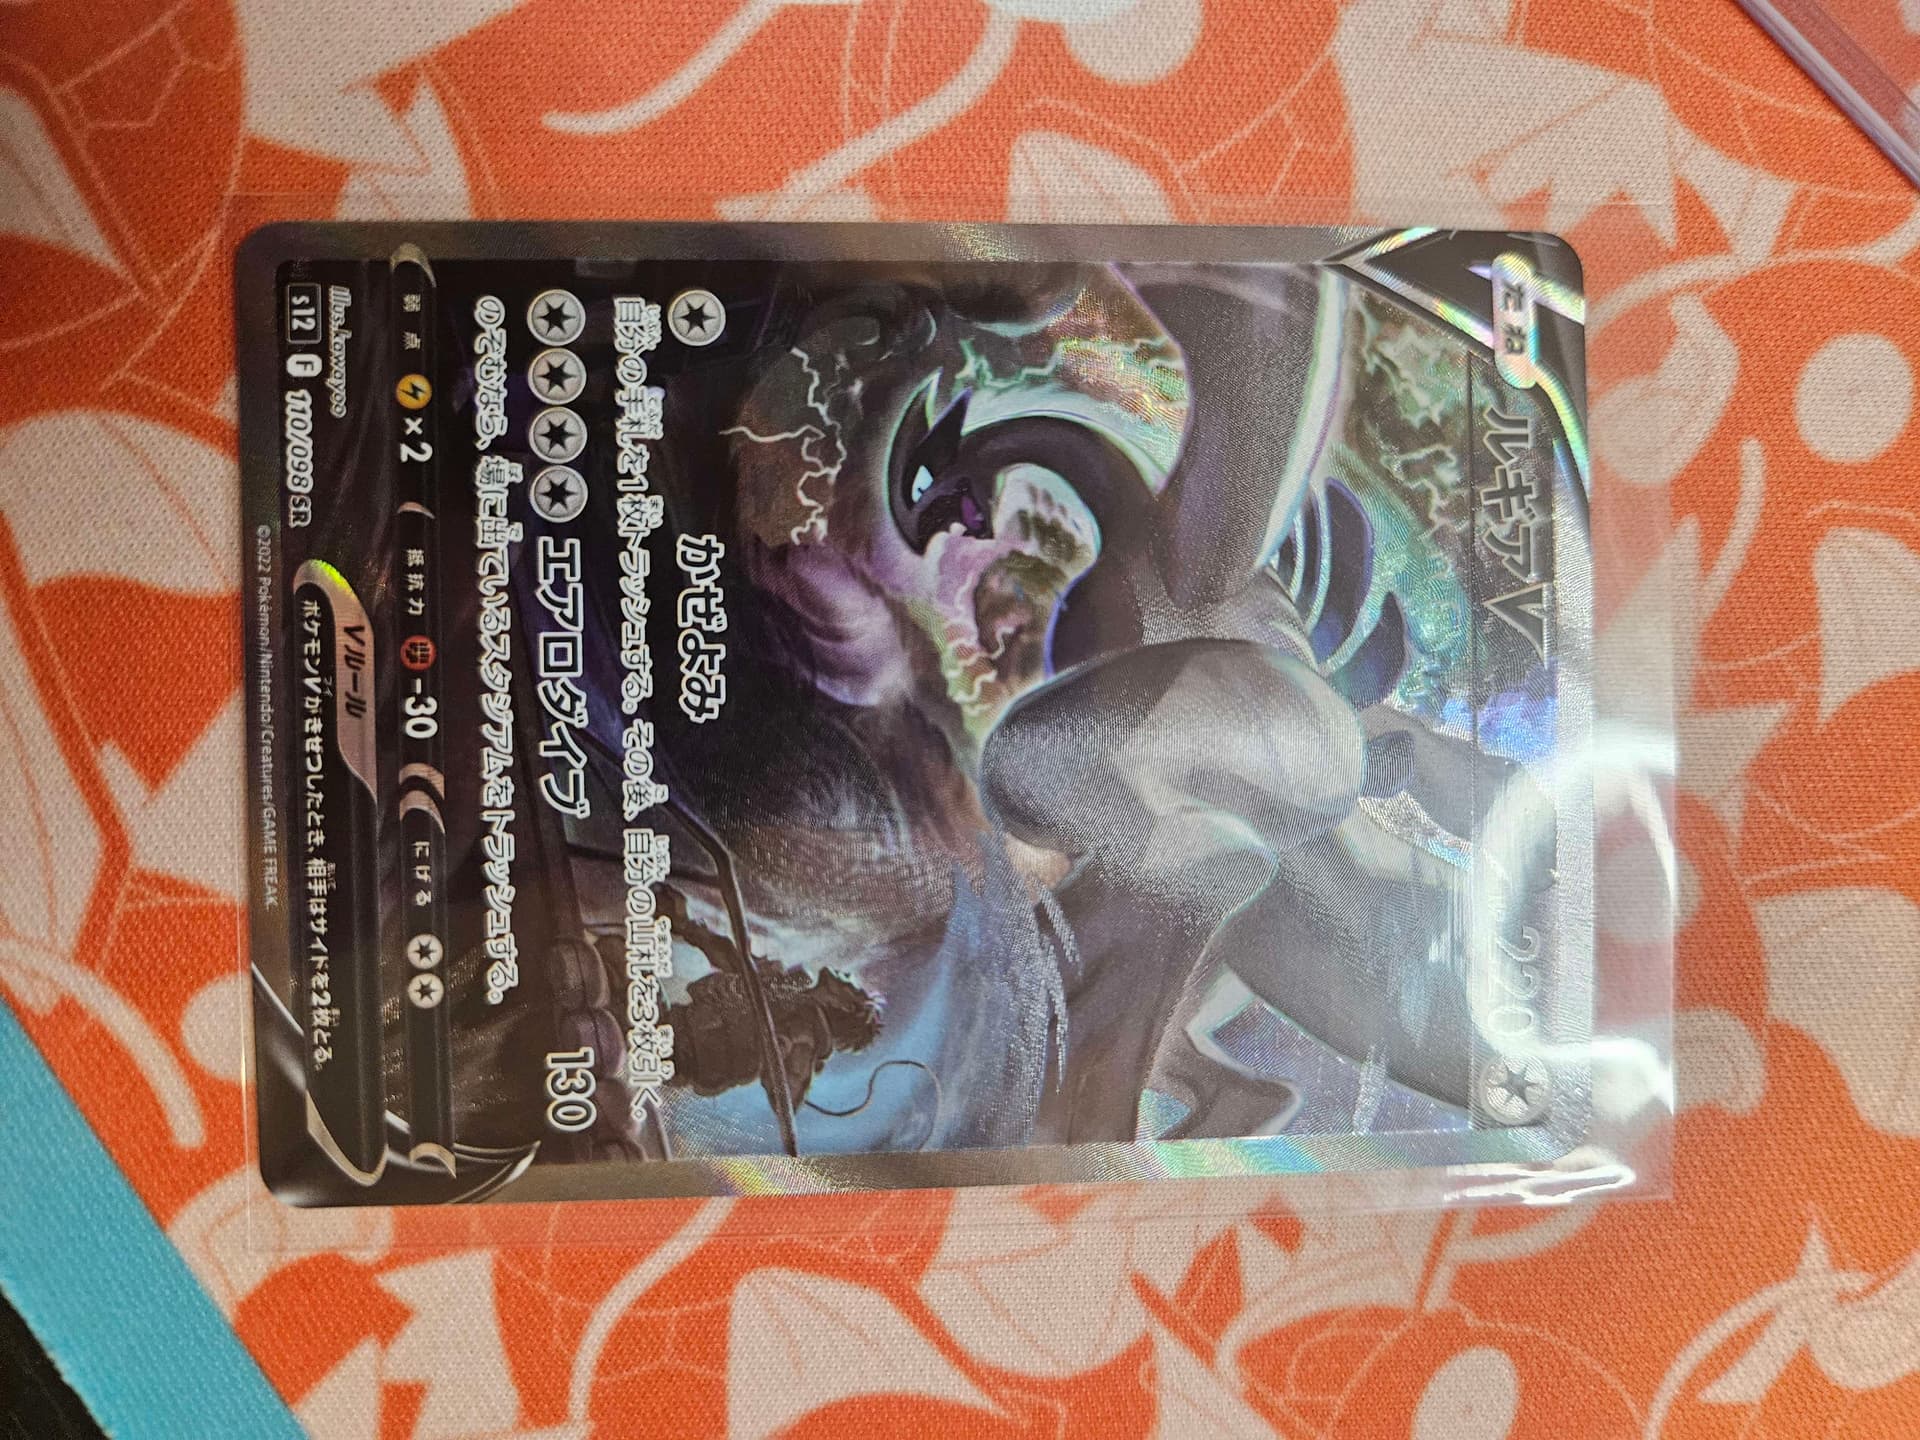 This was fresh out of a pack. Is this just a printing error? The